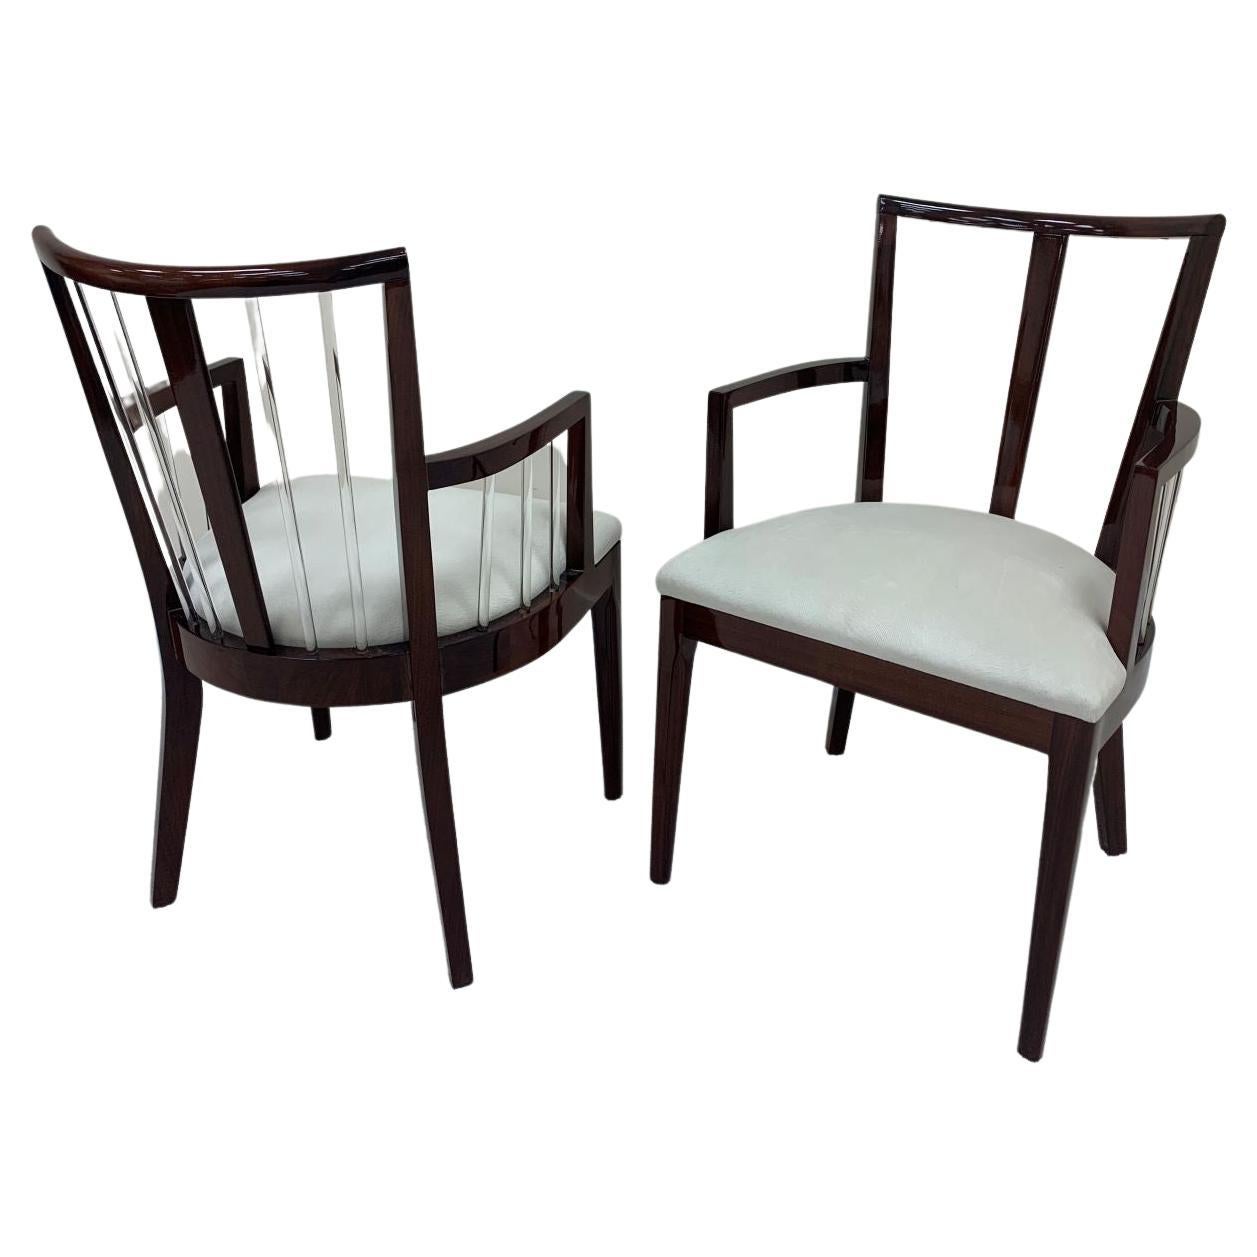 Set of six Art Deco dining chairs in the style of Grosfeld House. Unique design with solid glass rod elements in a solid mahogany frame complimented with faux pony skin upholstery. Professionally and beautifully restored. Set includes 2 Captain’s